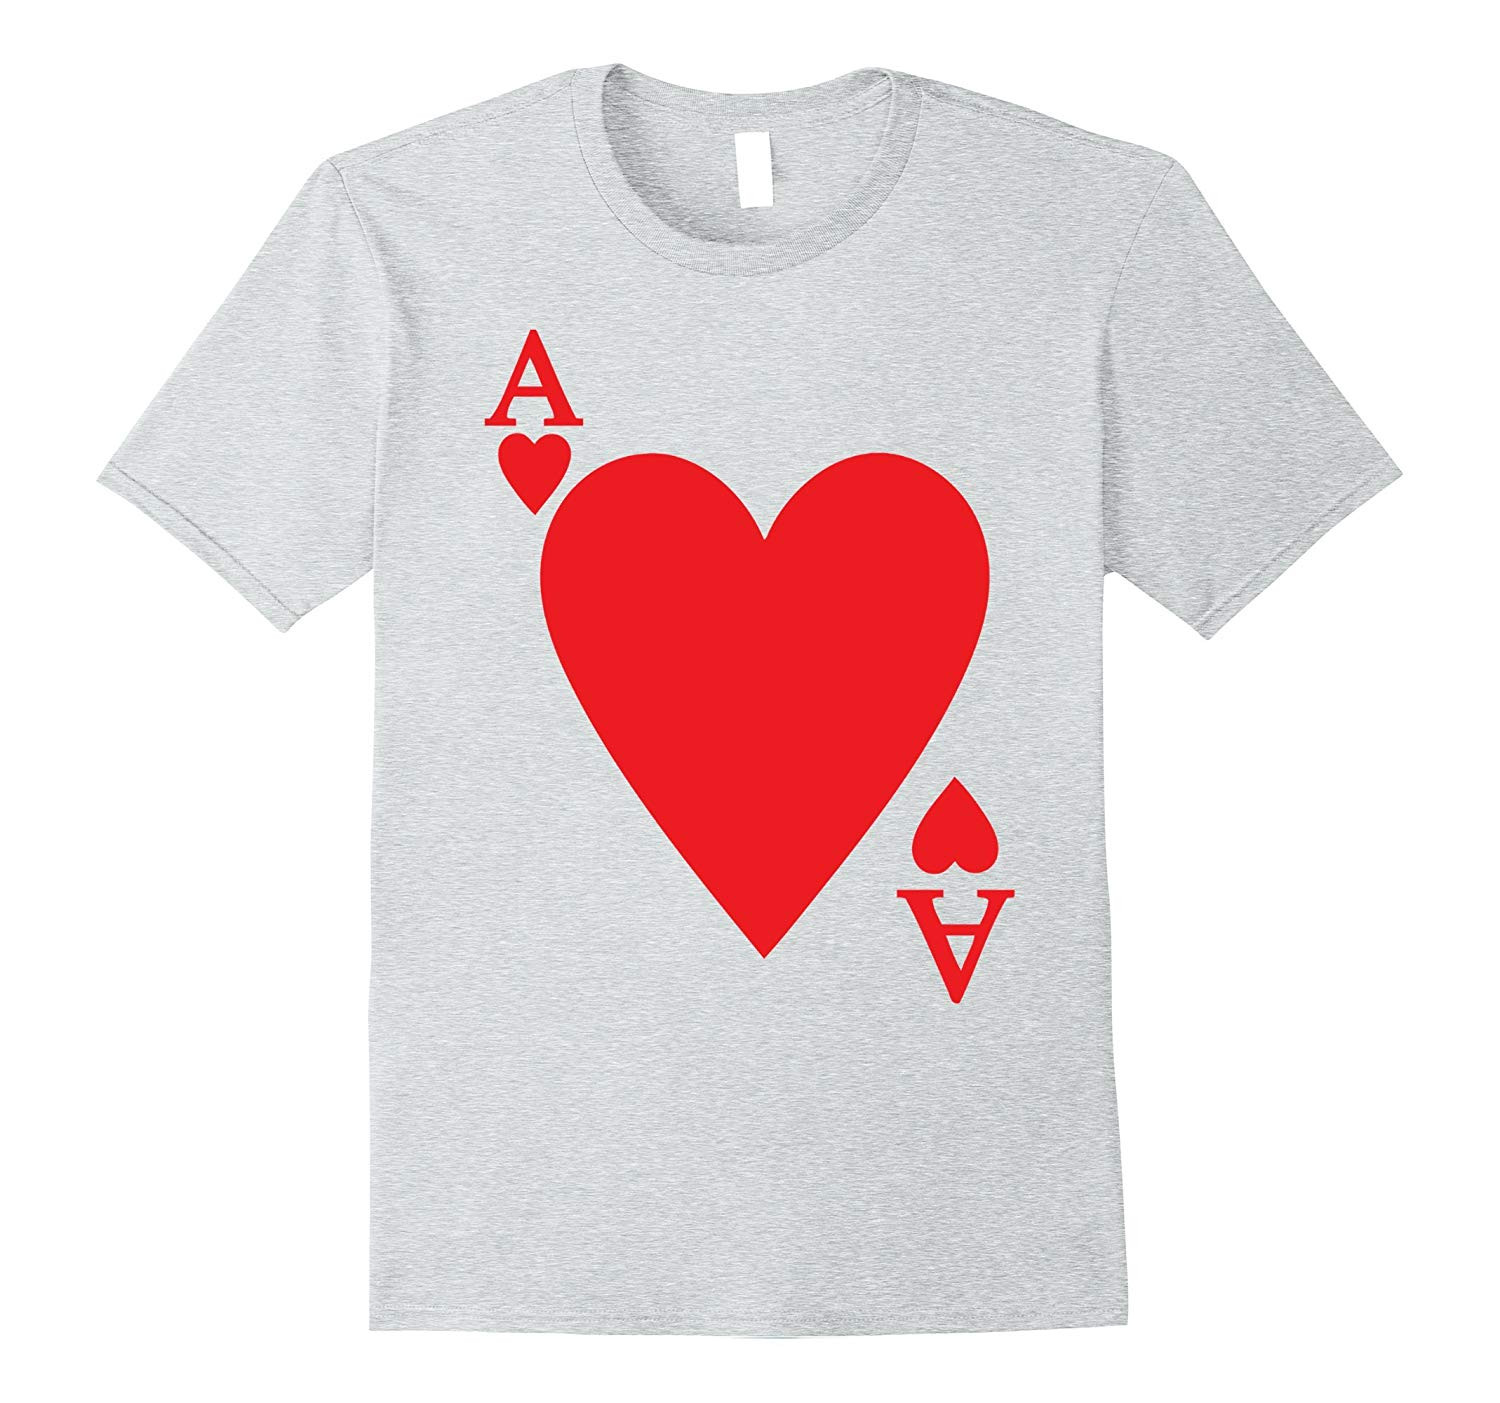 Deck Of Cards Halloween Costume
 Deck Cards Halloween Costume Ace HEART Matching